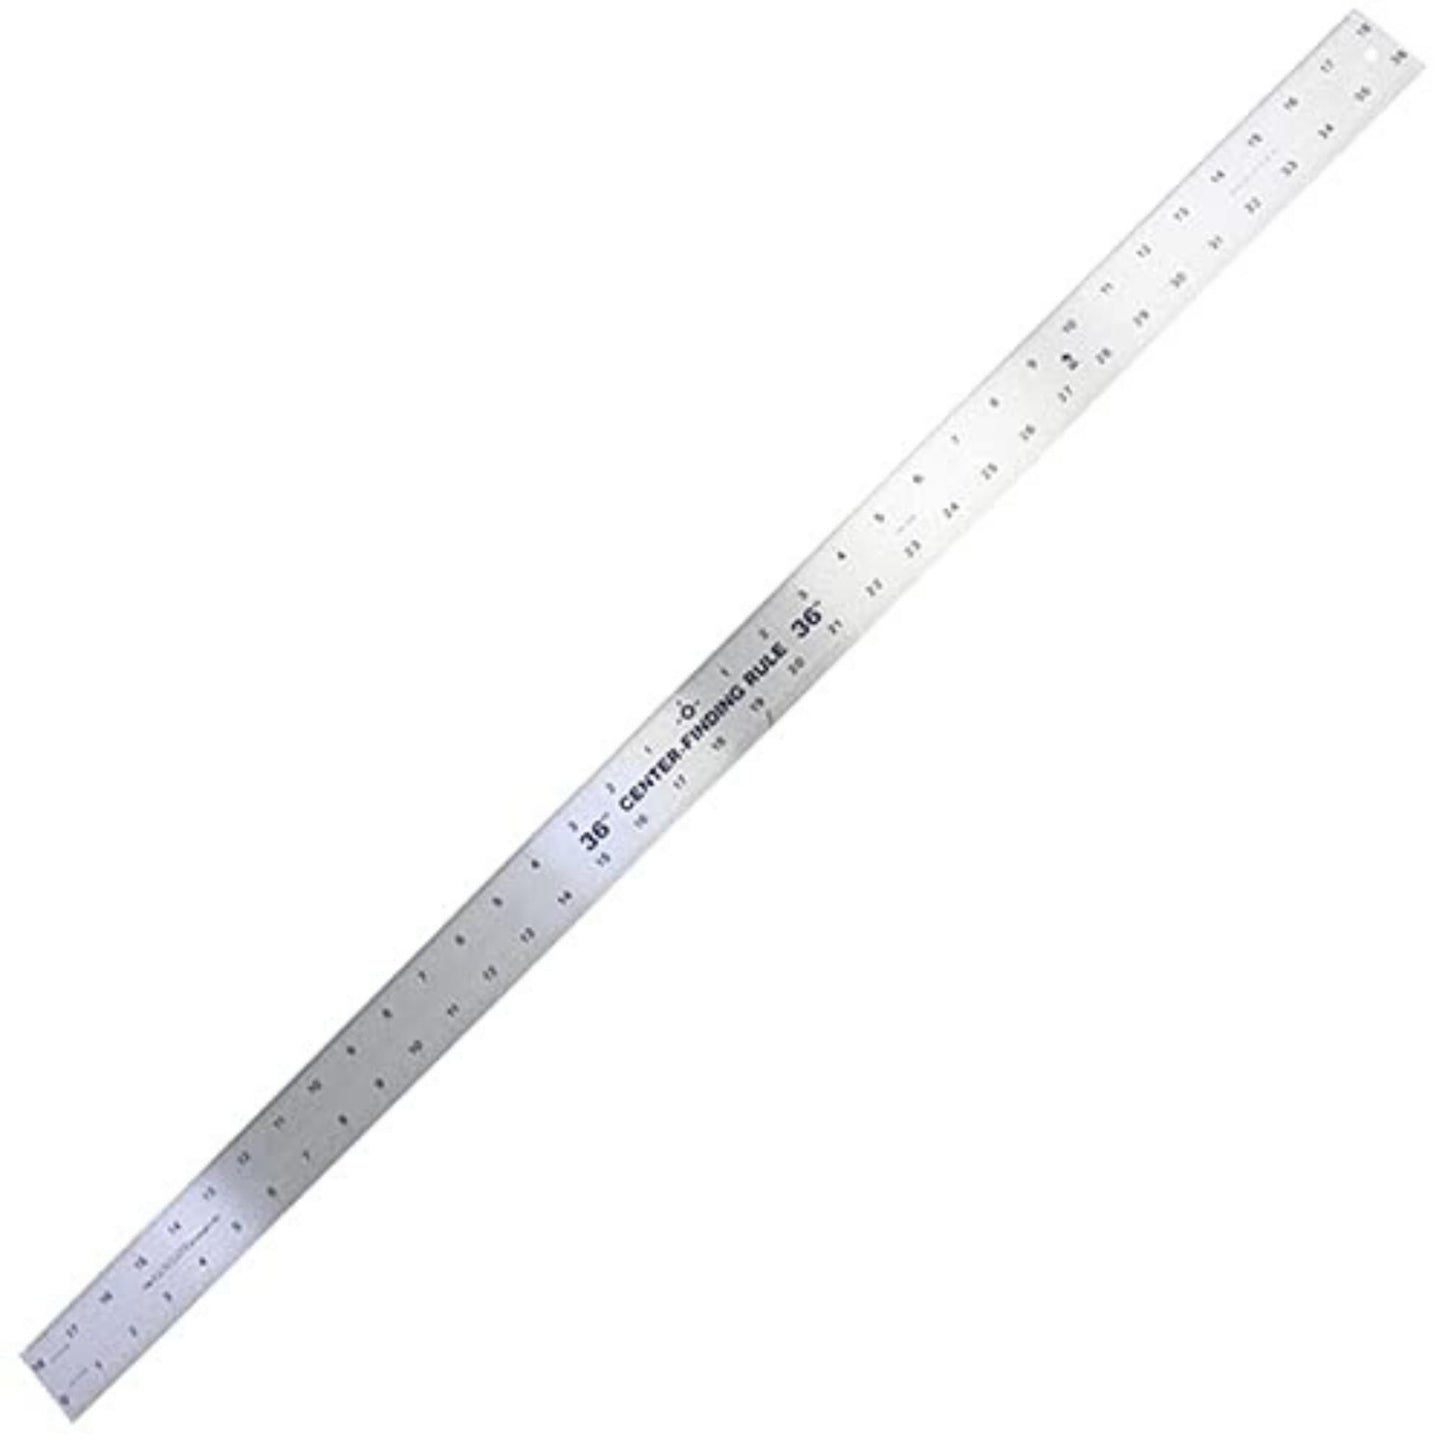 12 Center Finding Rulers - Wholesale Prices on Safety Pins by Strang  Advance